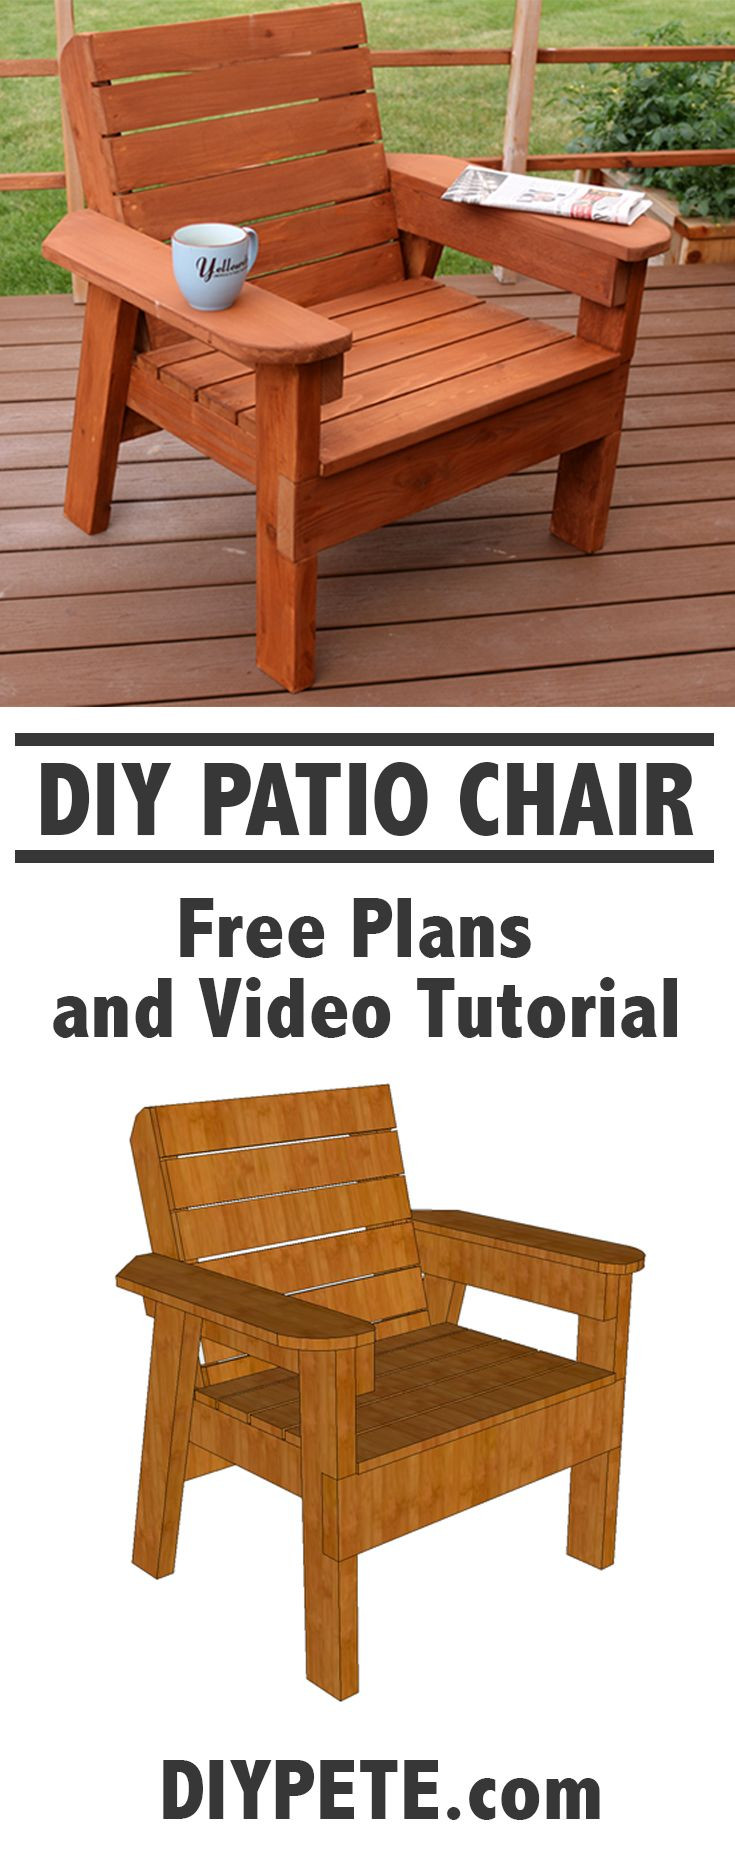 DIY Wood Chair Plans
 DIY Patio Chair with Plans